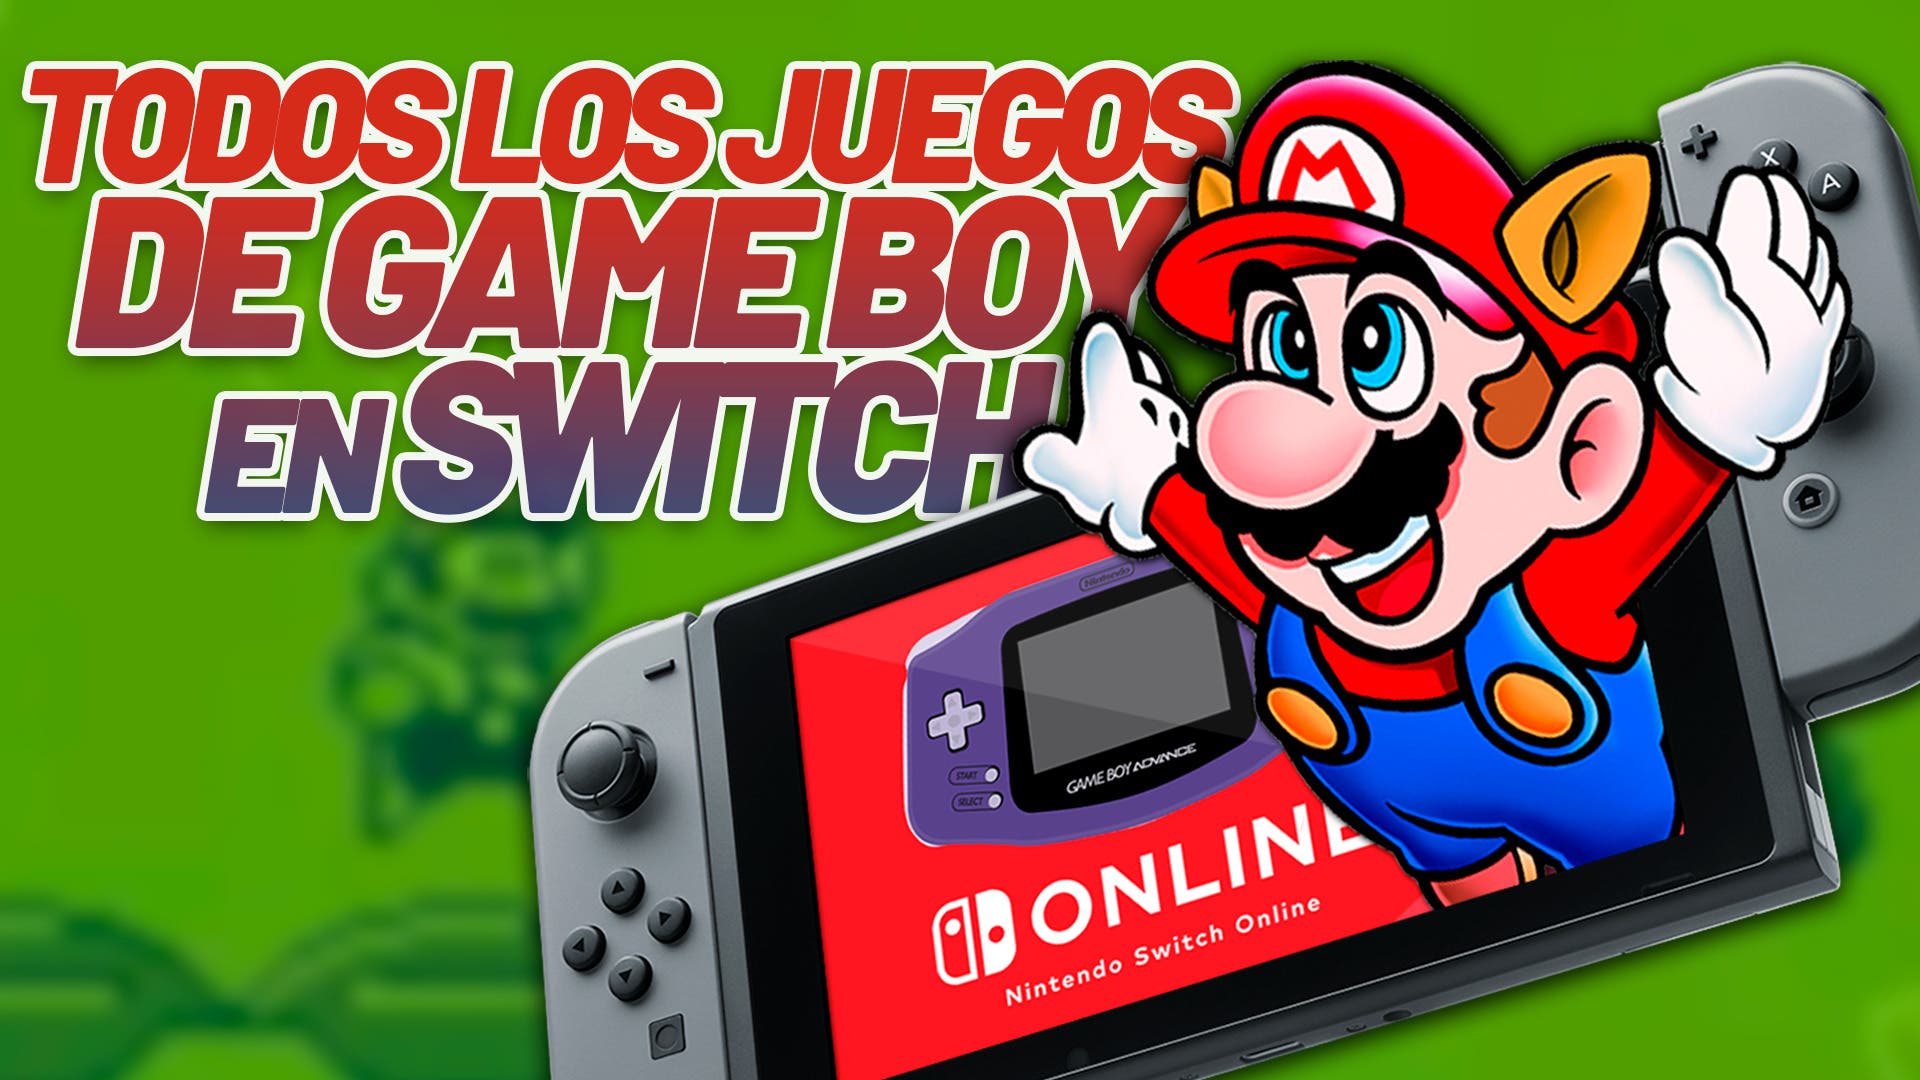 Nintendo Switch Online: all Game Boy games available